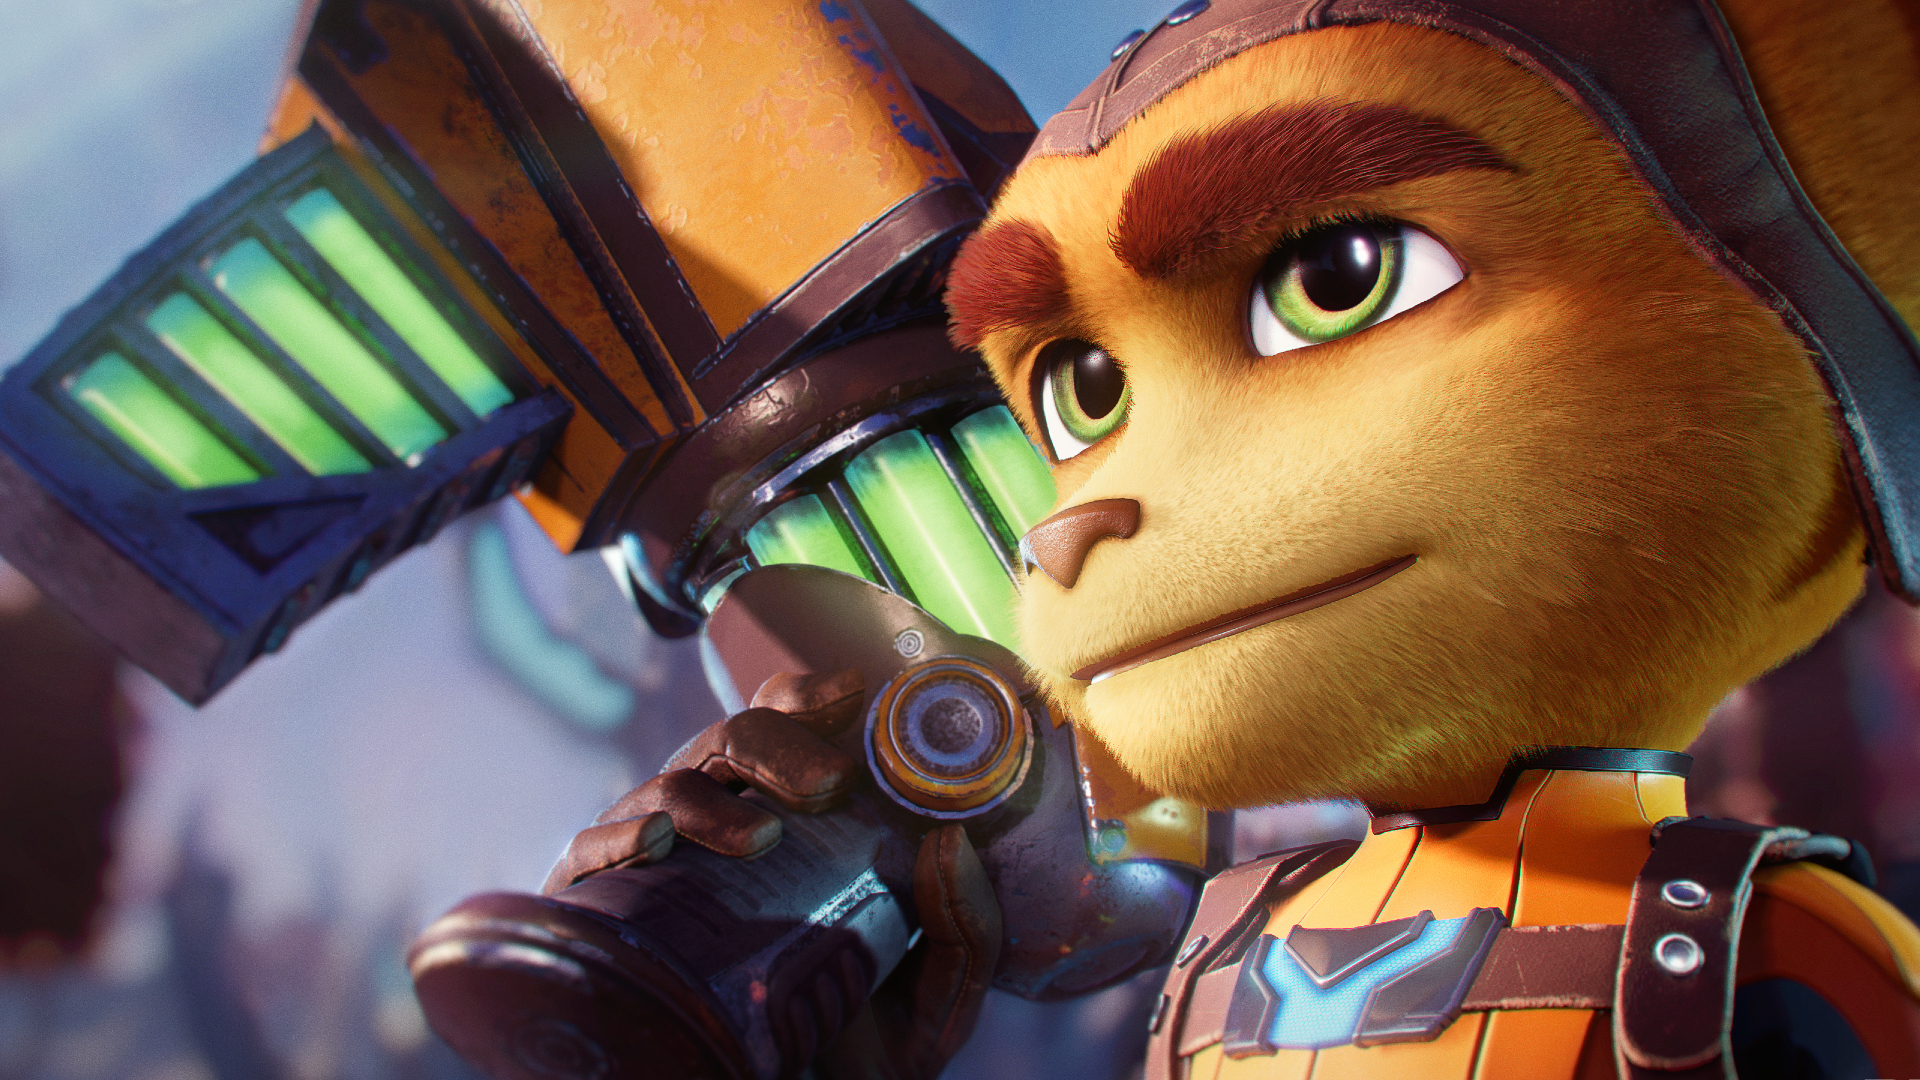 Digital Foundry dissects Ratchet & Clank Rift Apart